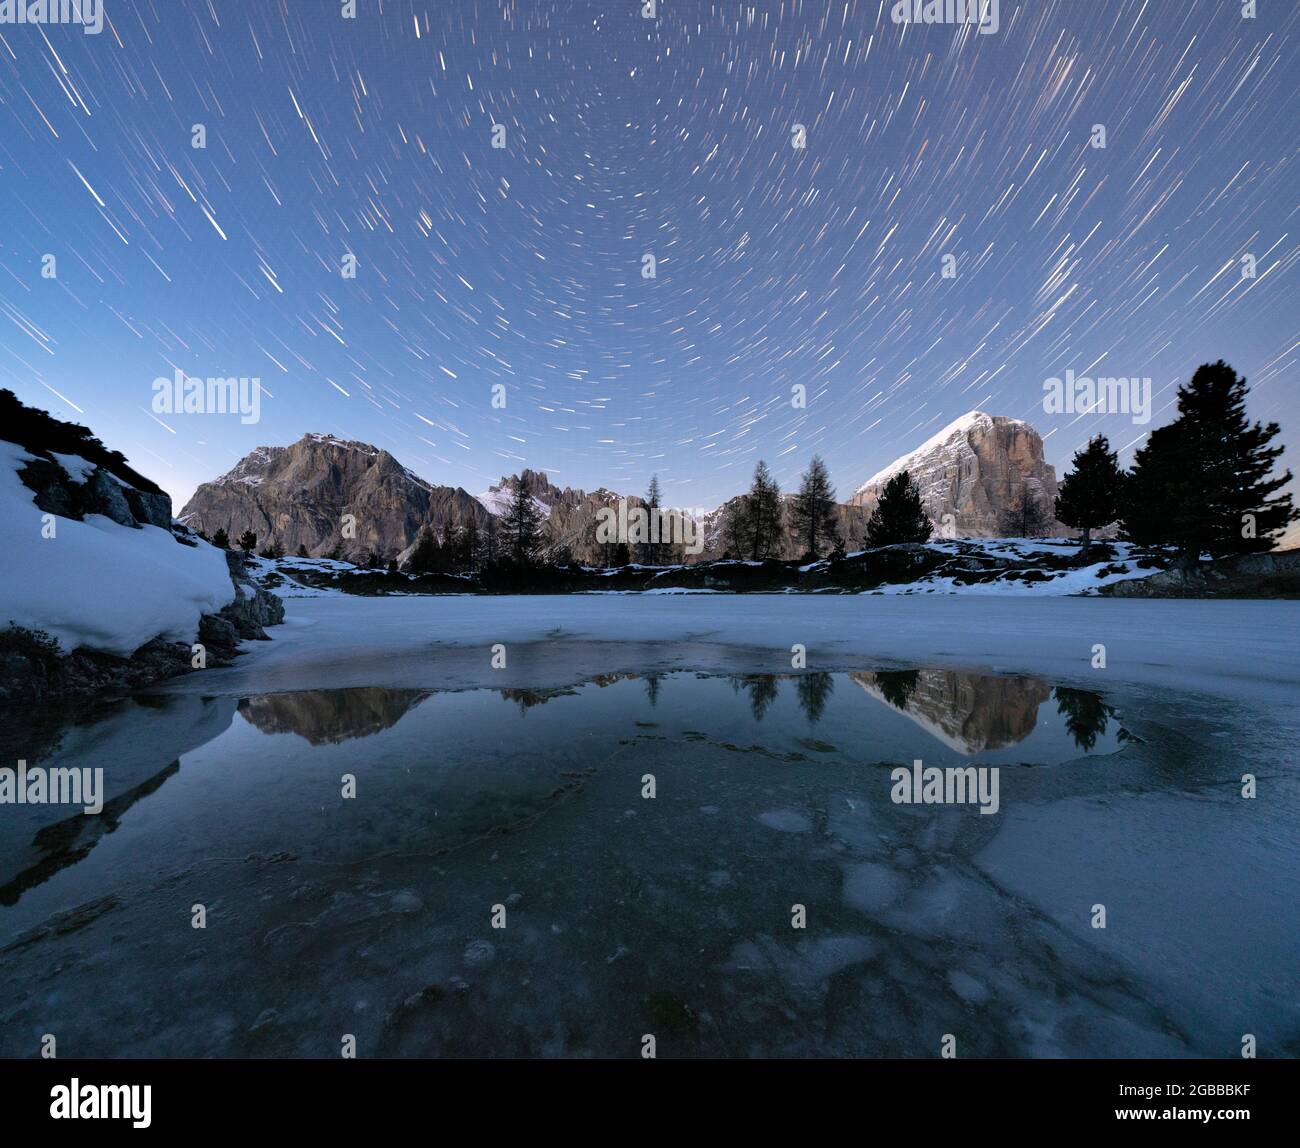 Polar star trail in the night sky over Lagazuoi and Tofana di Rozes peaks from frozen lake Limides, Dolomites, Veneto, Italy, Europe Stock Photo